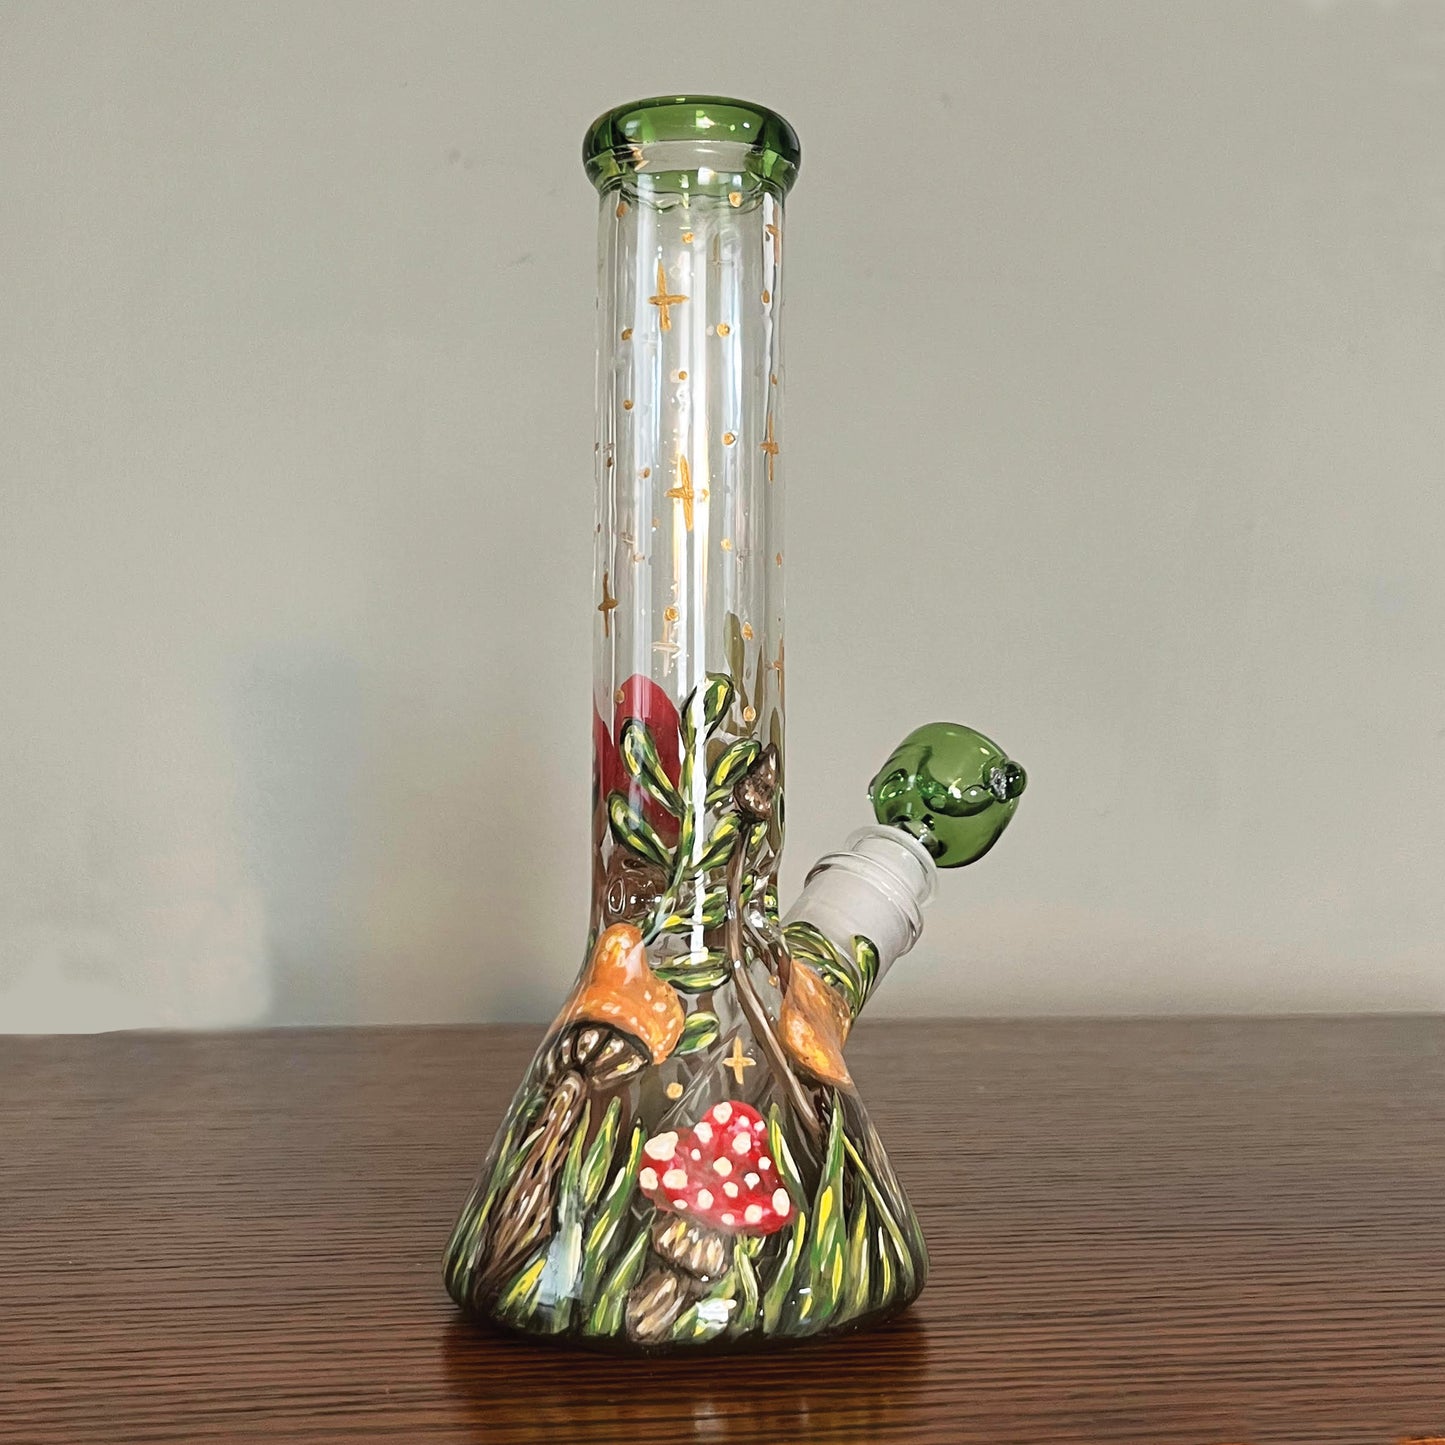 This is the back of the bong. There is a taller orange mushroom next to a red one with white dots.